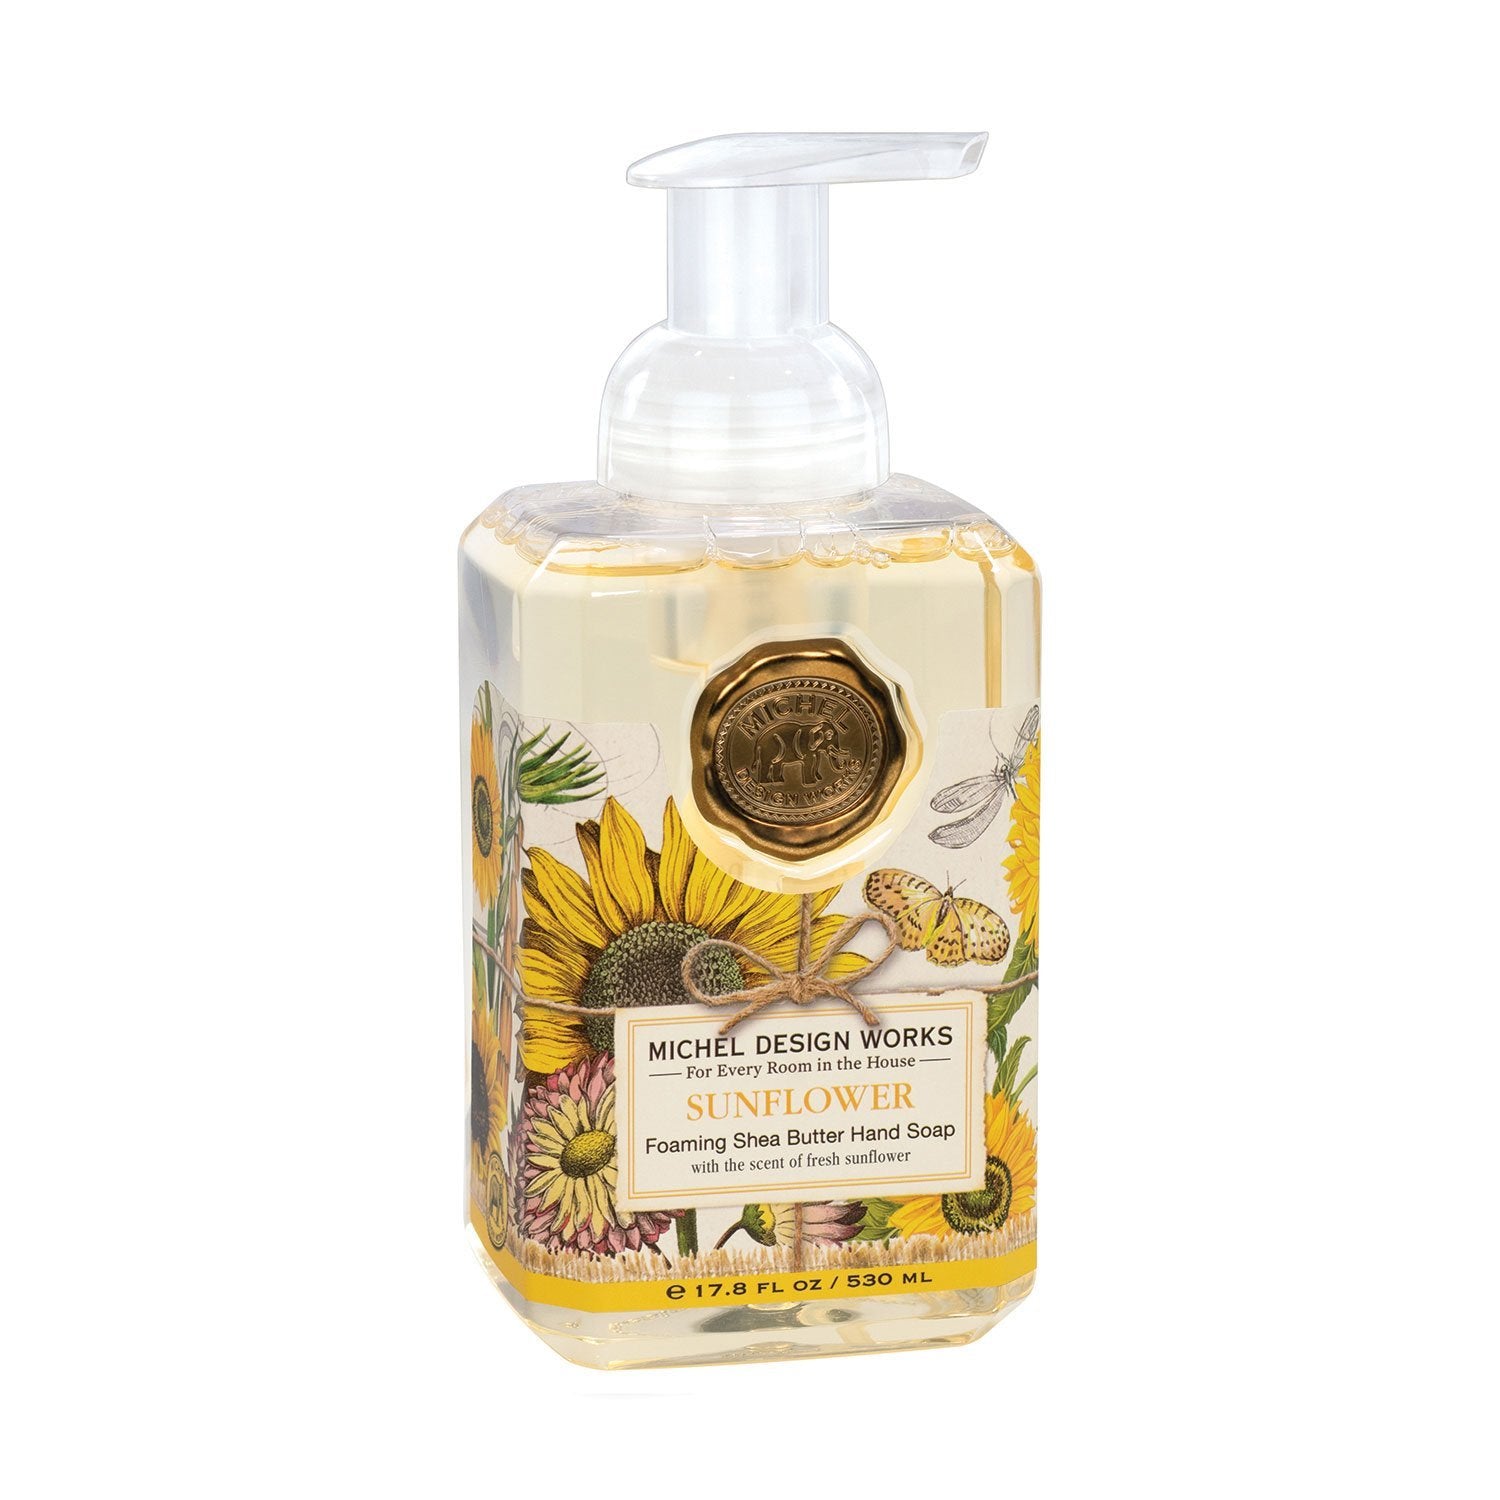 Sunflowers, dahlias, and marigolds are bursting with rich yellows and golds—perfect for autumn and lovely all year round. Scent of fresh sunflower with touches of citrus, ripe fruit, and spice. The generous size of this foaming hand soap proves you can offer great value without sacrificing quality. Plus it contains luxurious shea butter and aloe vera for gentle cleansing and moisturizing.